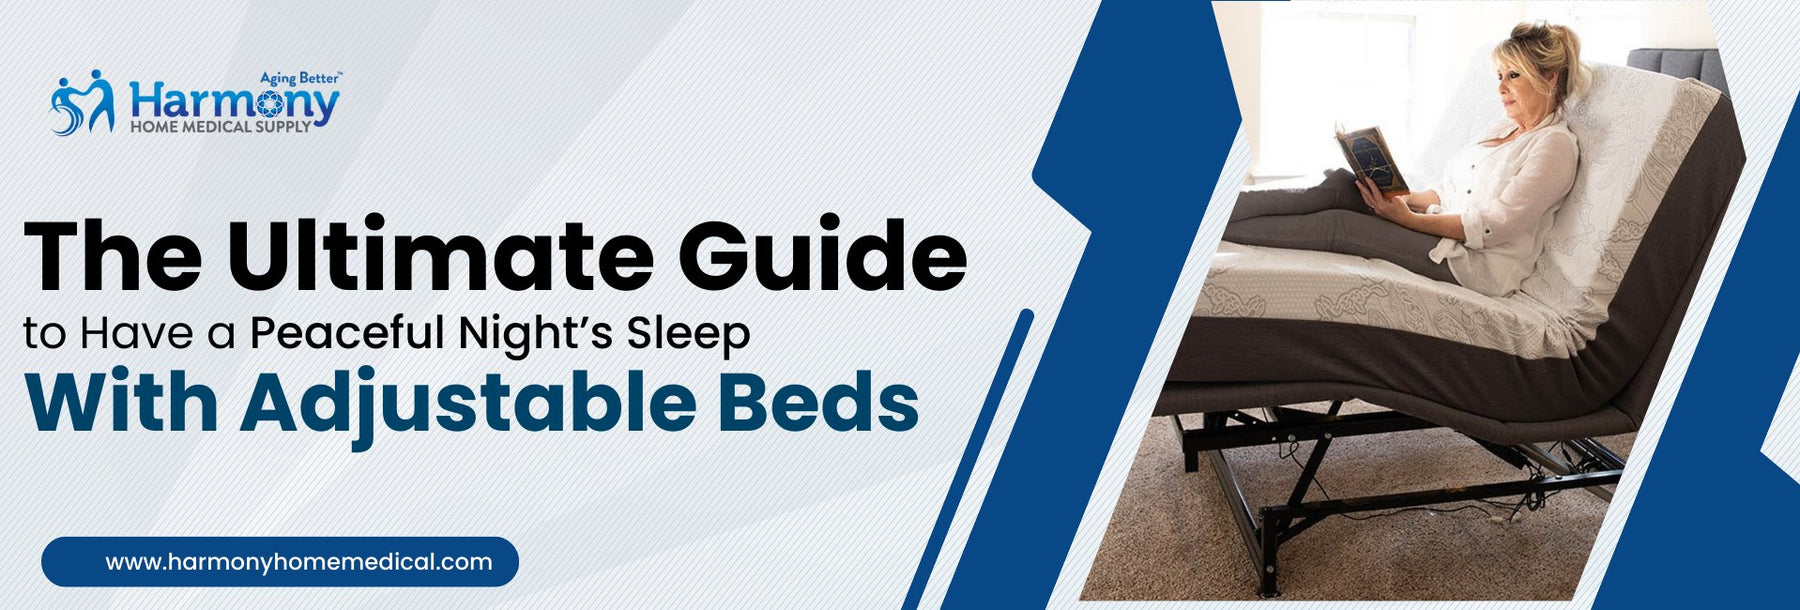 The Ultimate Guide to Peaceful Sleep with Adjustable Beds - Harmony Home Medical Supply